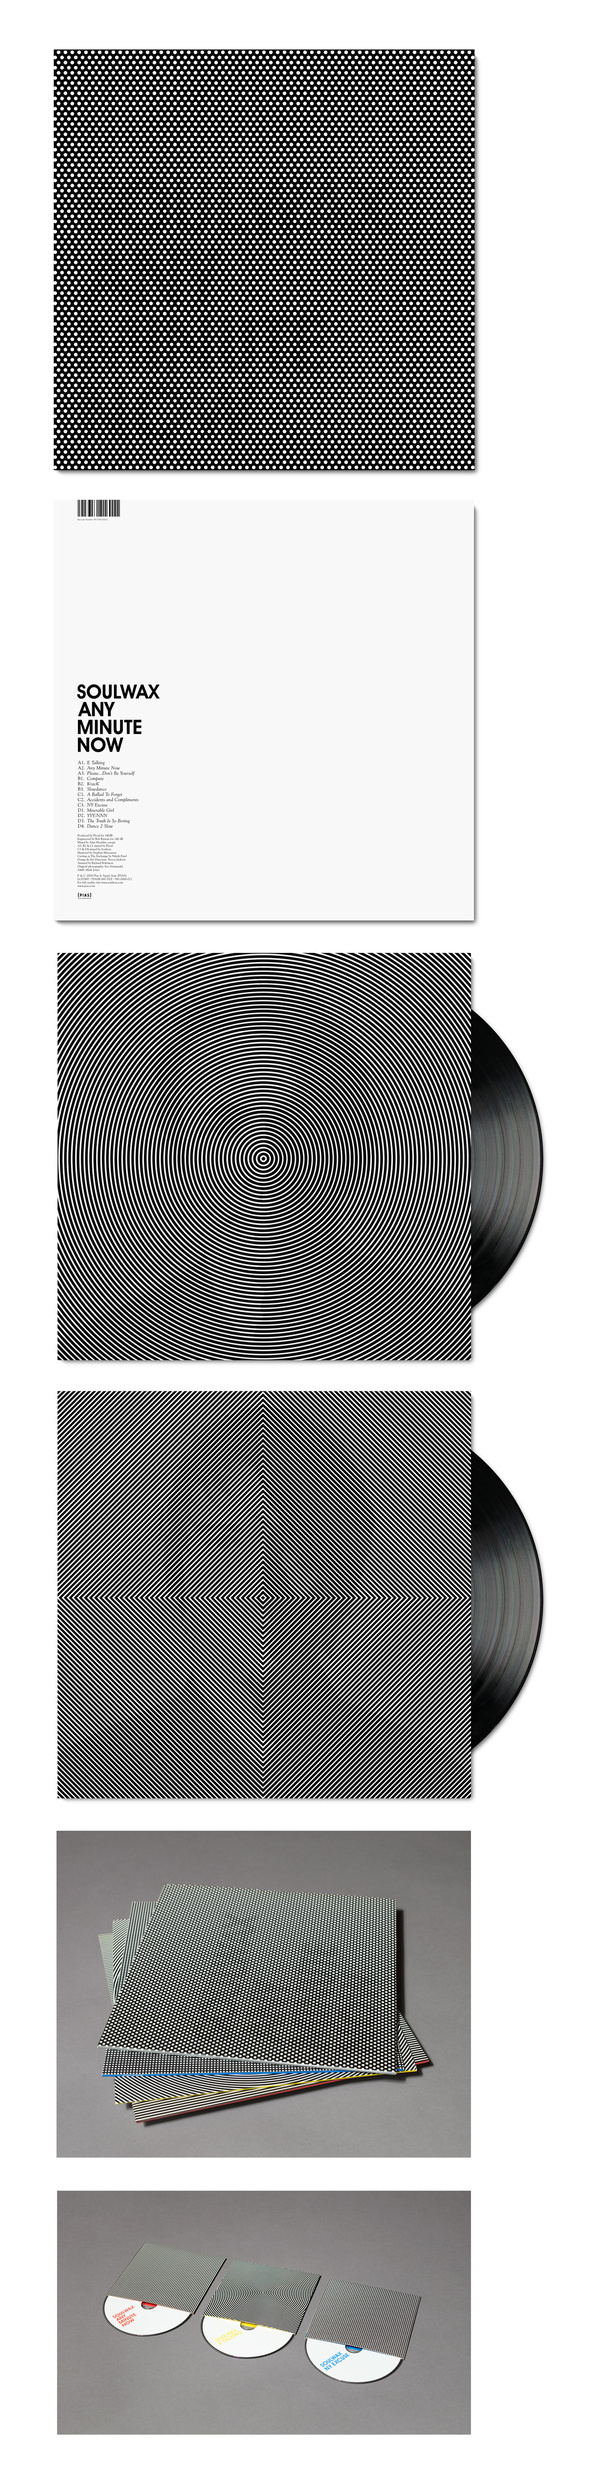 Richard Robinson x Mads Perch Double Feature #packaging #album #record